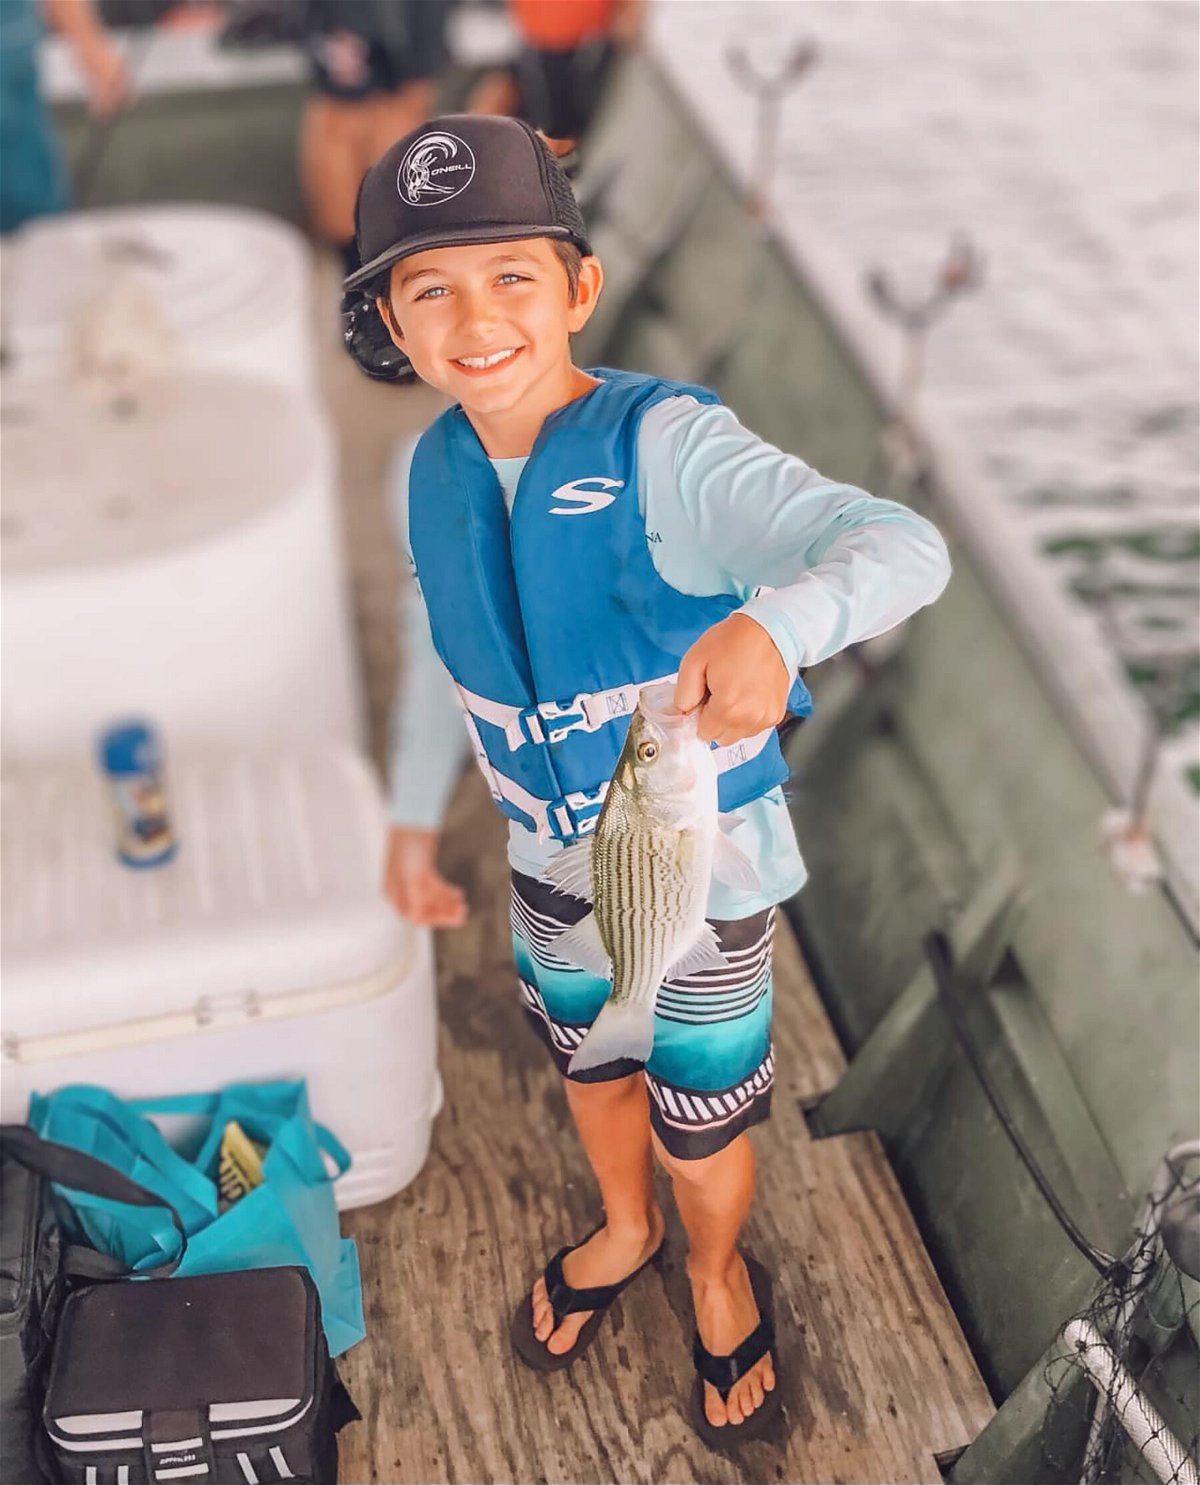 A 10-year-old boy has part of his leg amputated after shark attack off  Florida Keys - KTVZ